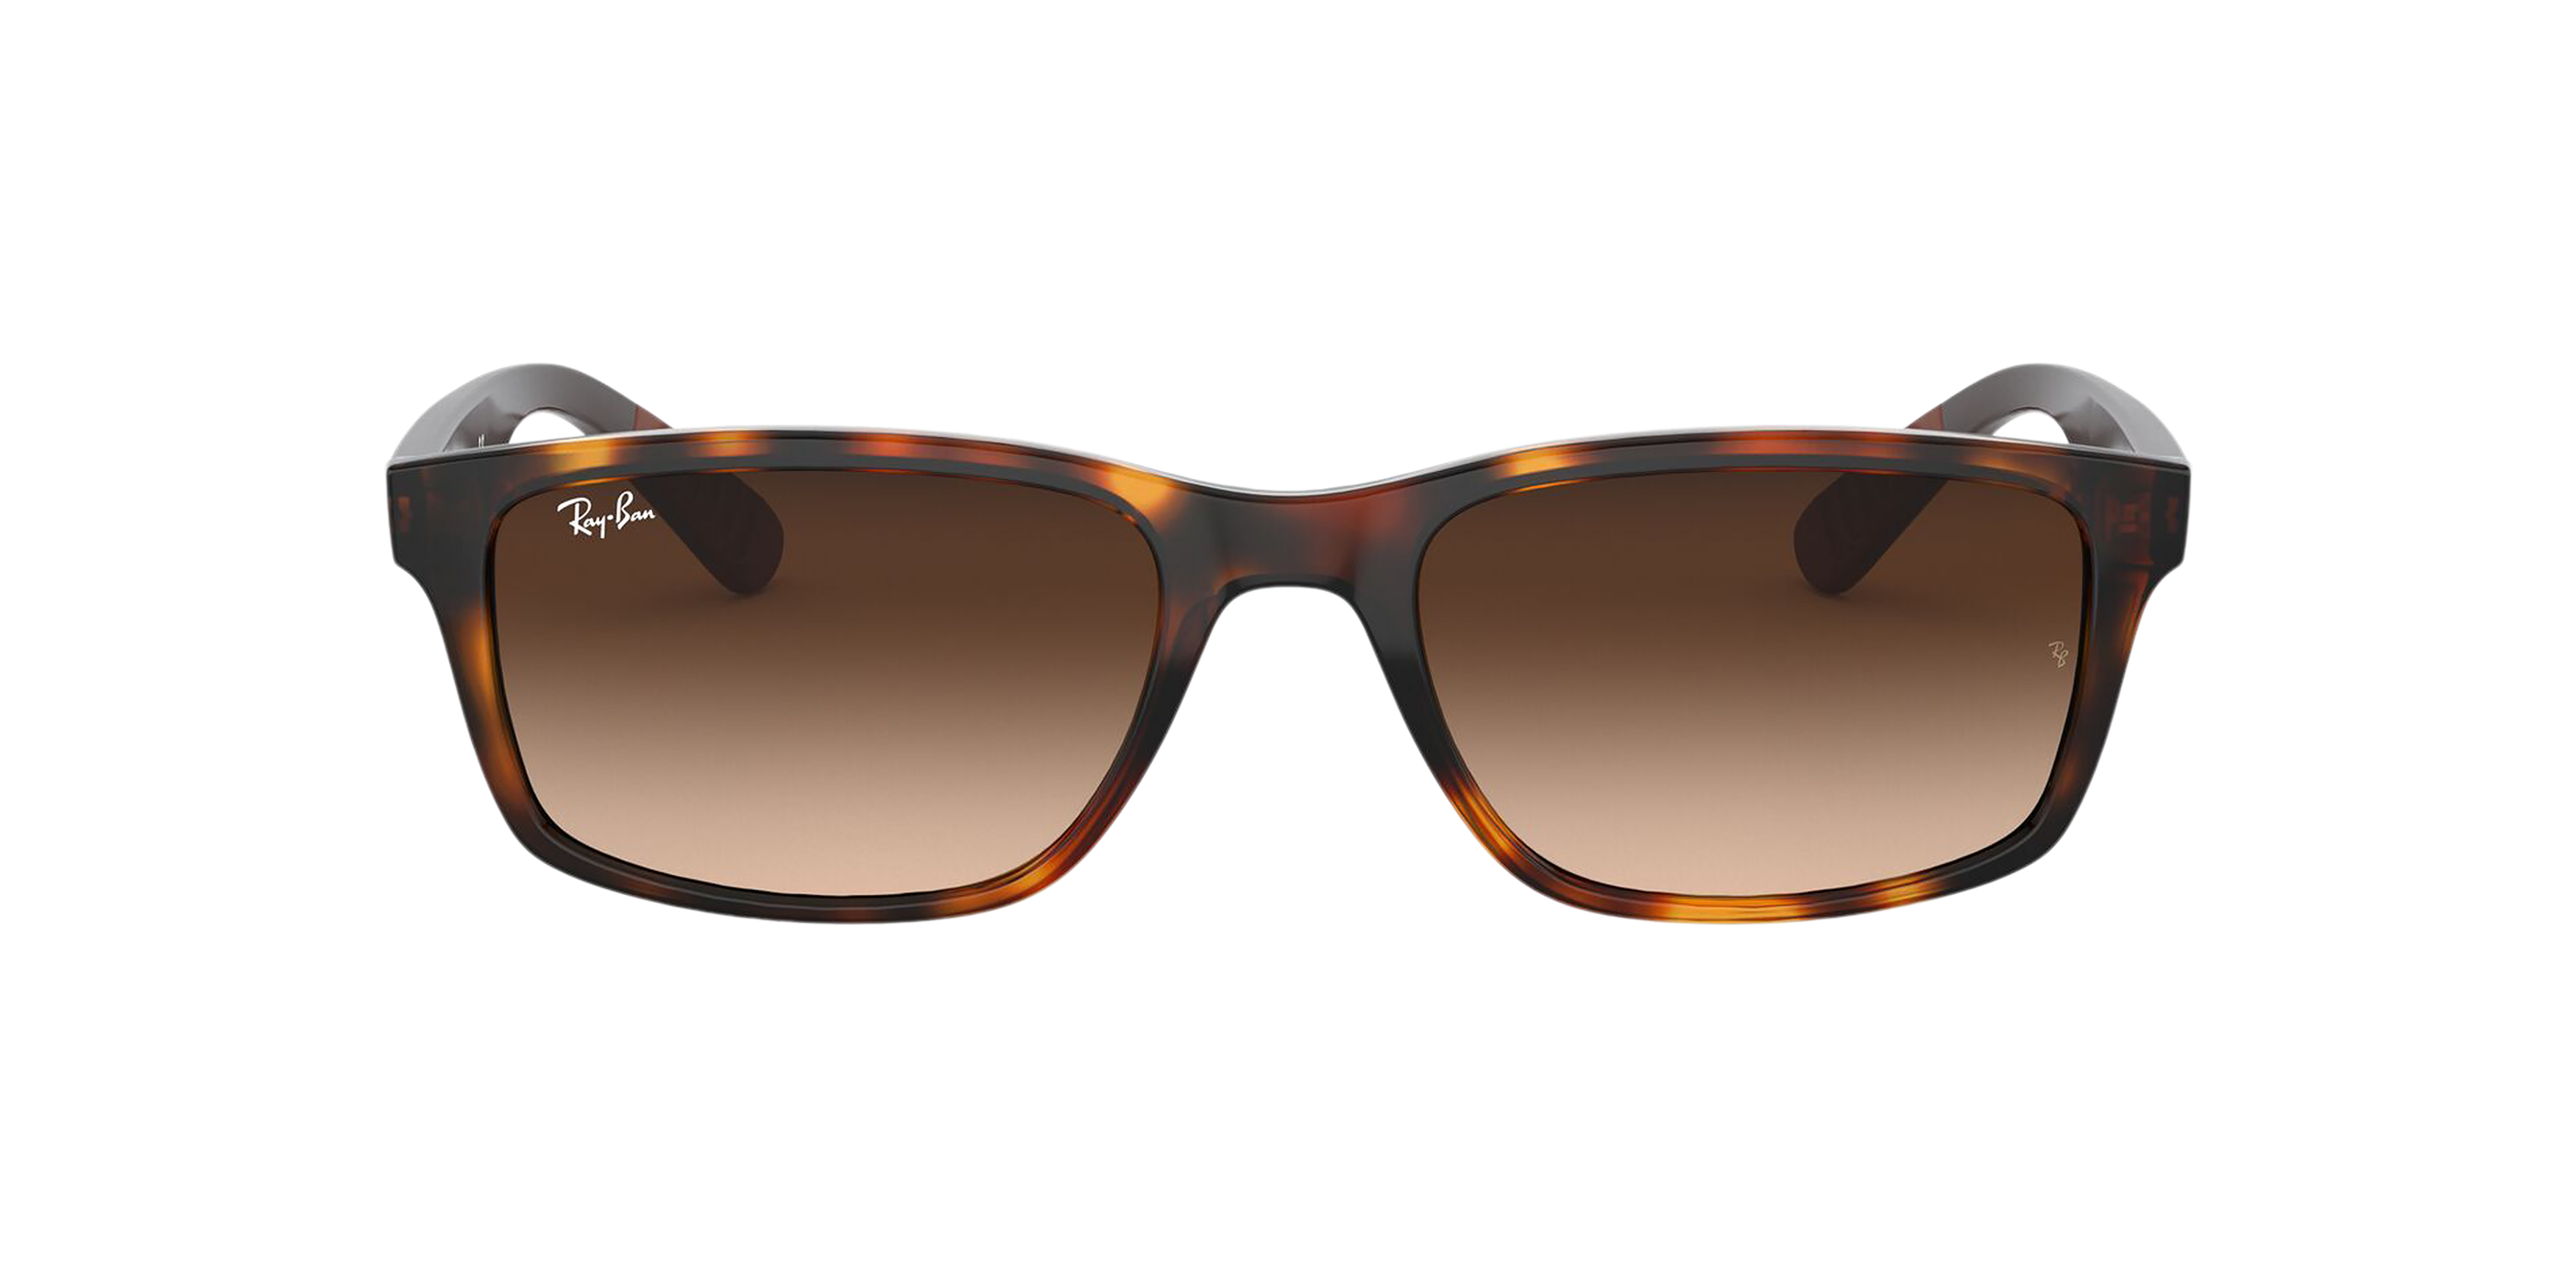 [products.image.front] Ray-Ban RB4234 620513